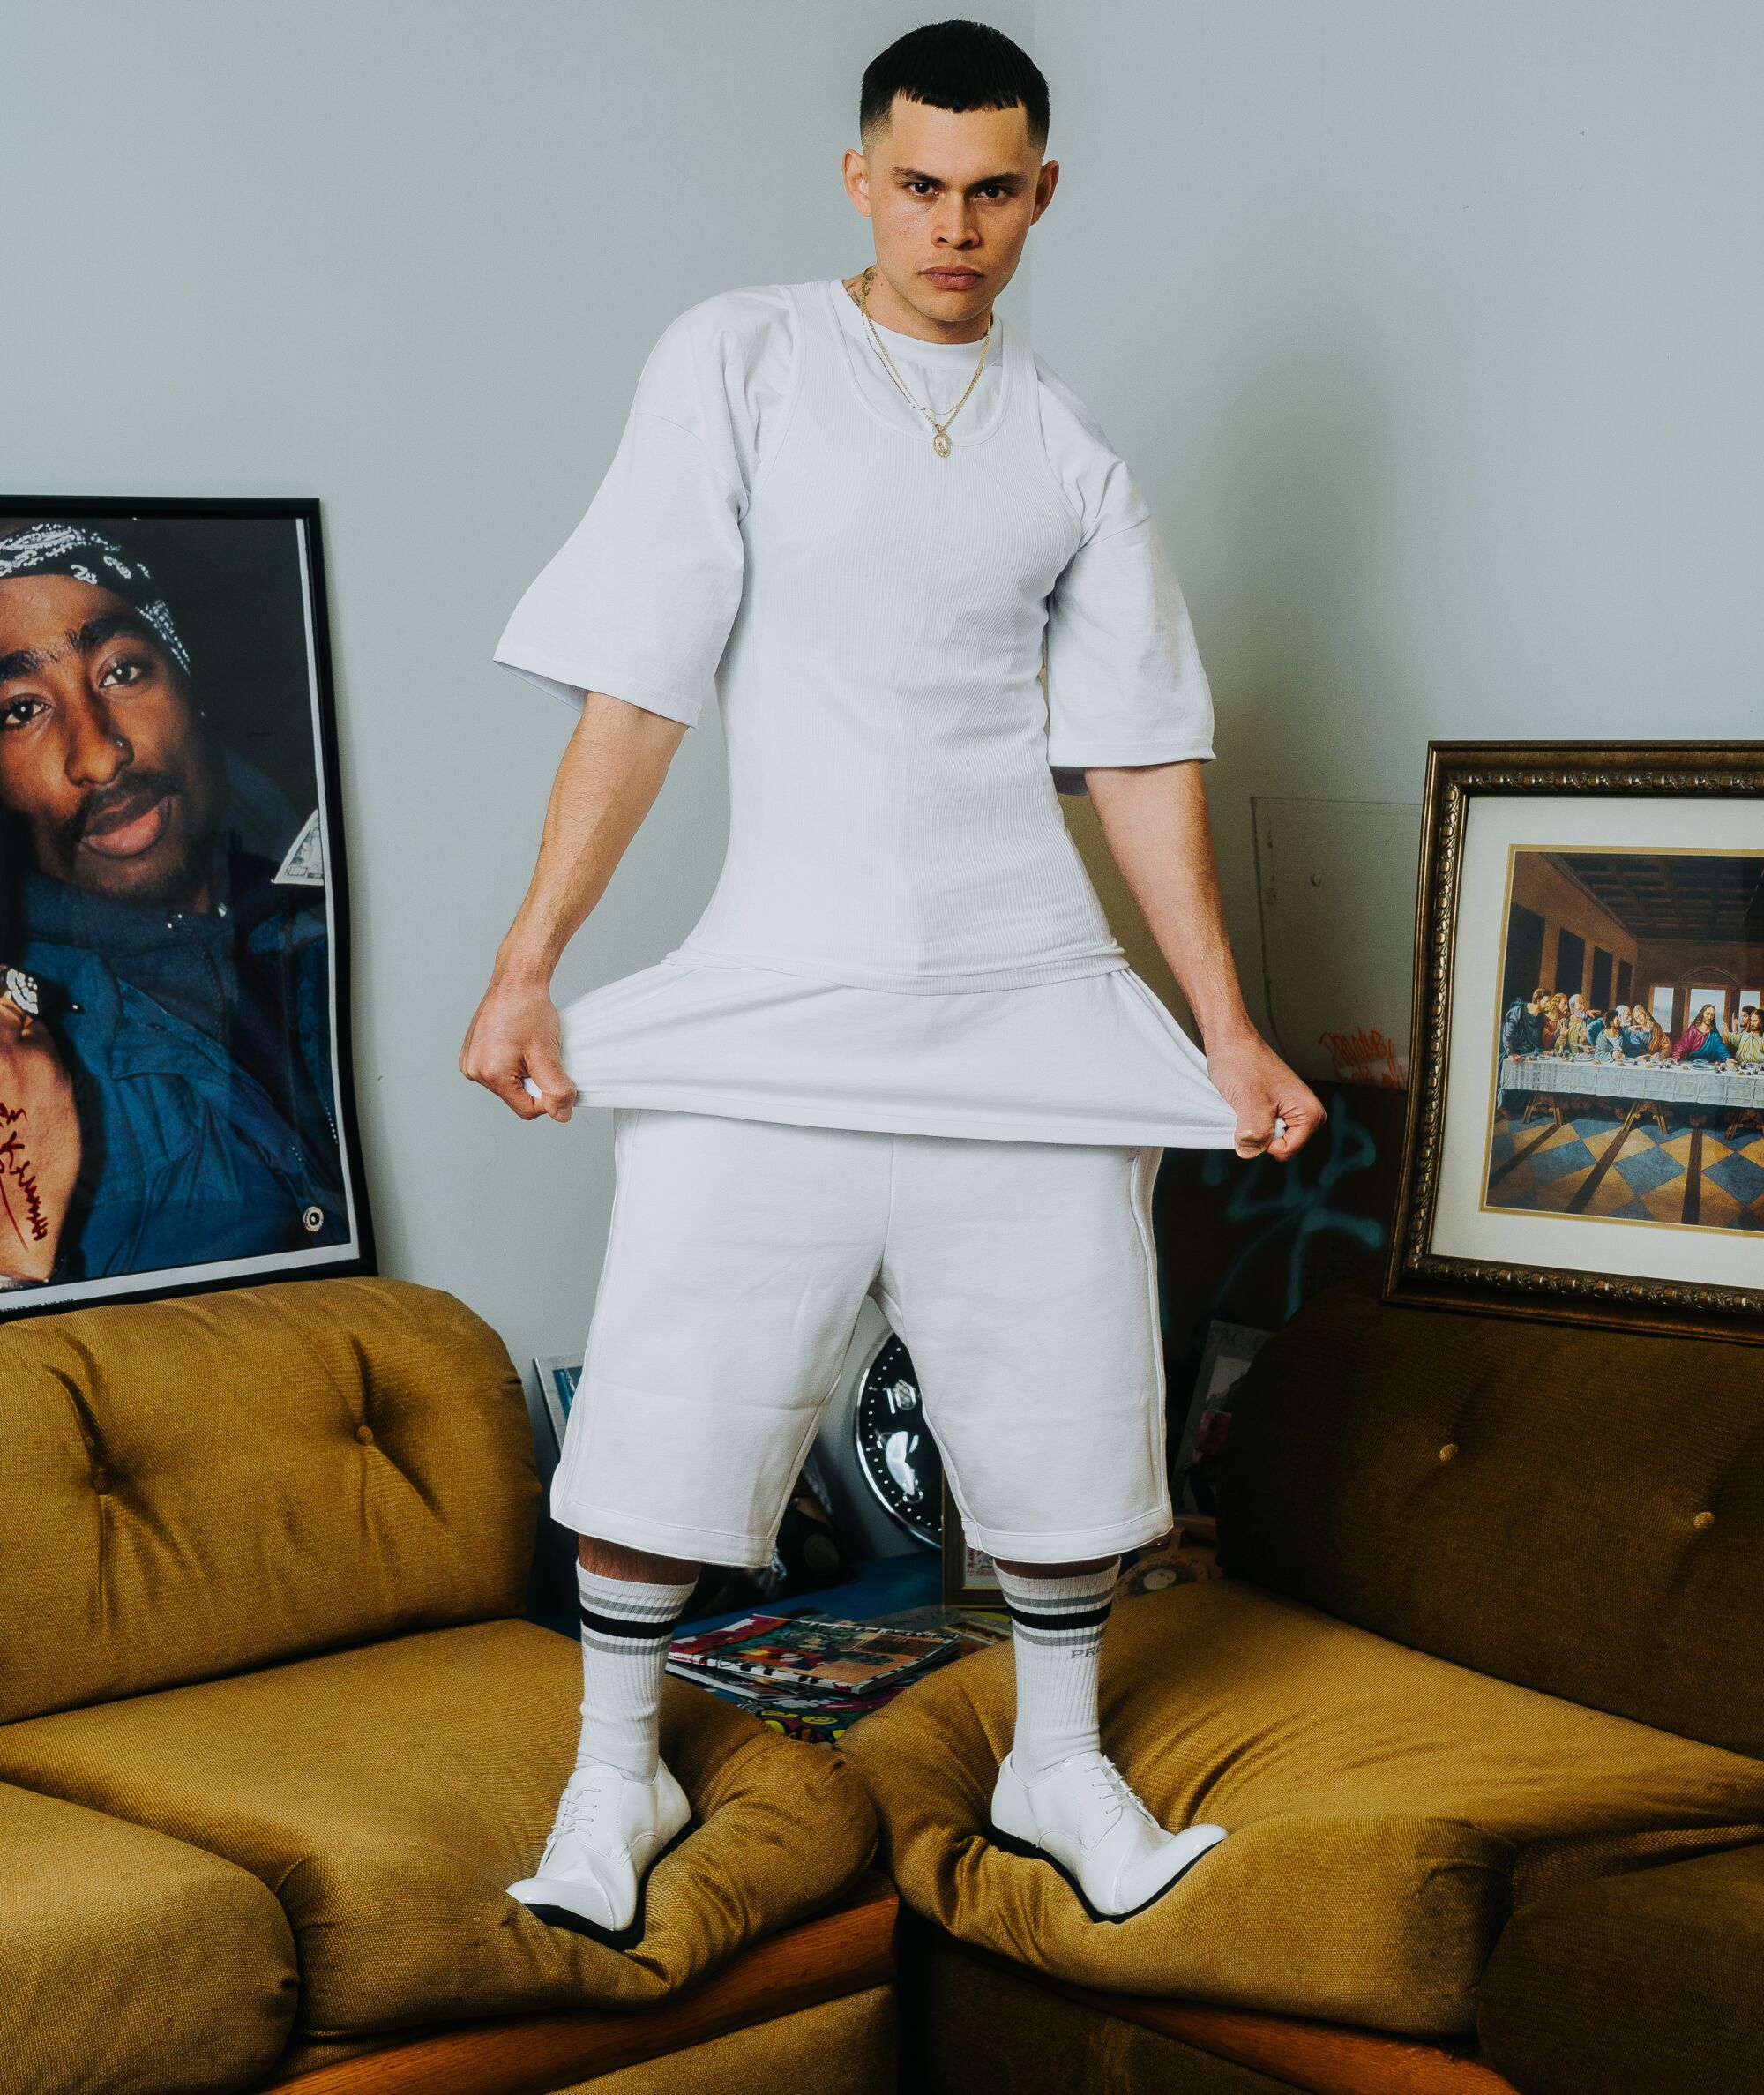 A model wears a full Pro Club outfit while standing on a couch.